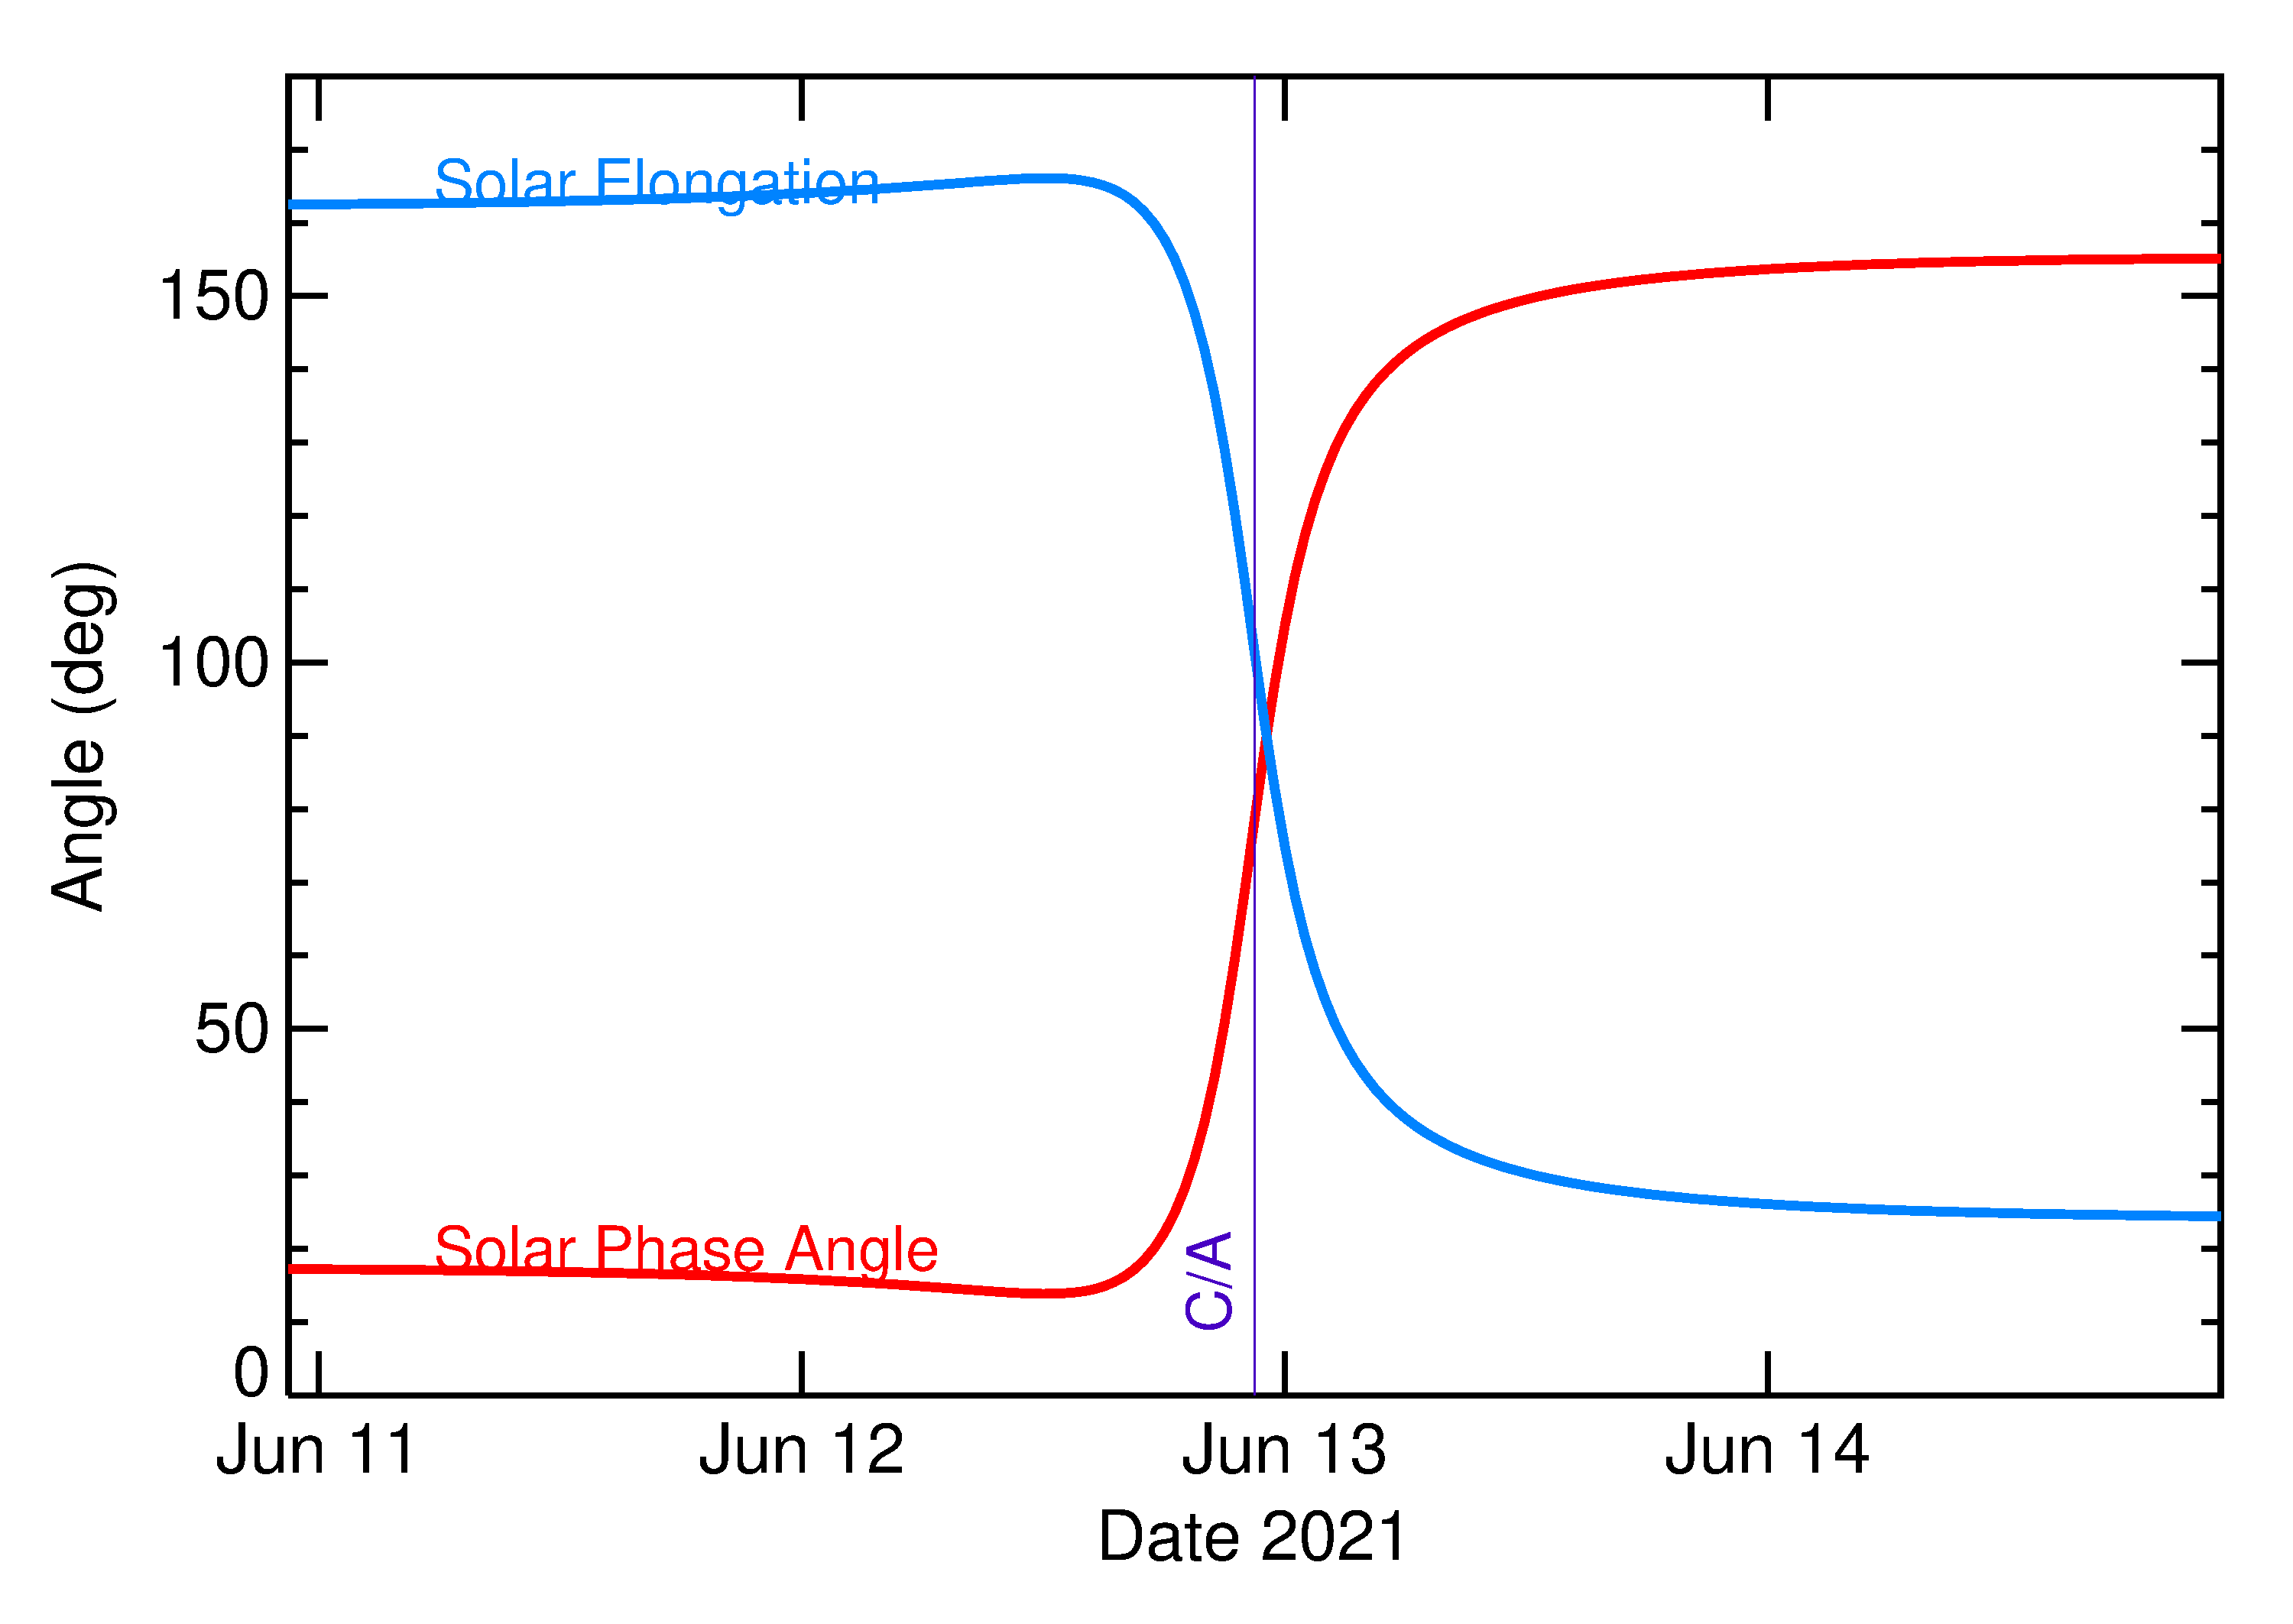 Solar Elongation and Solar Phase Angle of 2021 LG5 in the days around closest approach